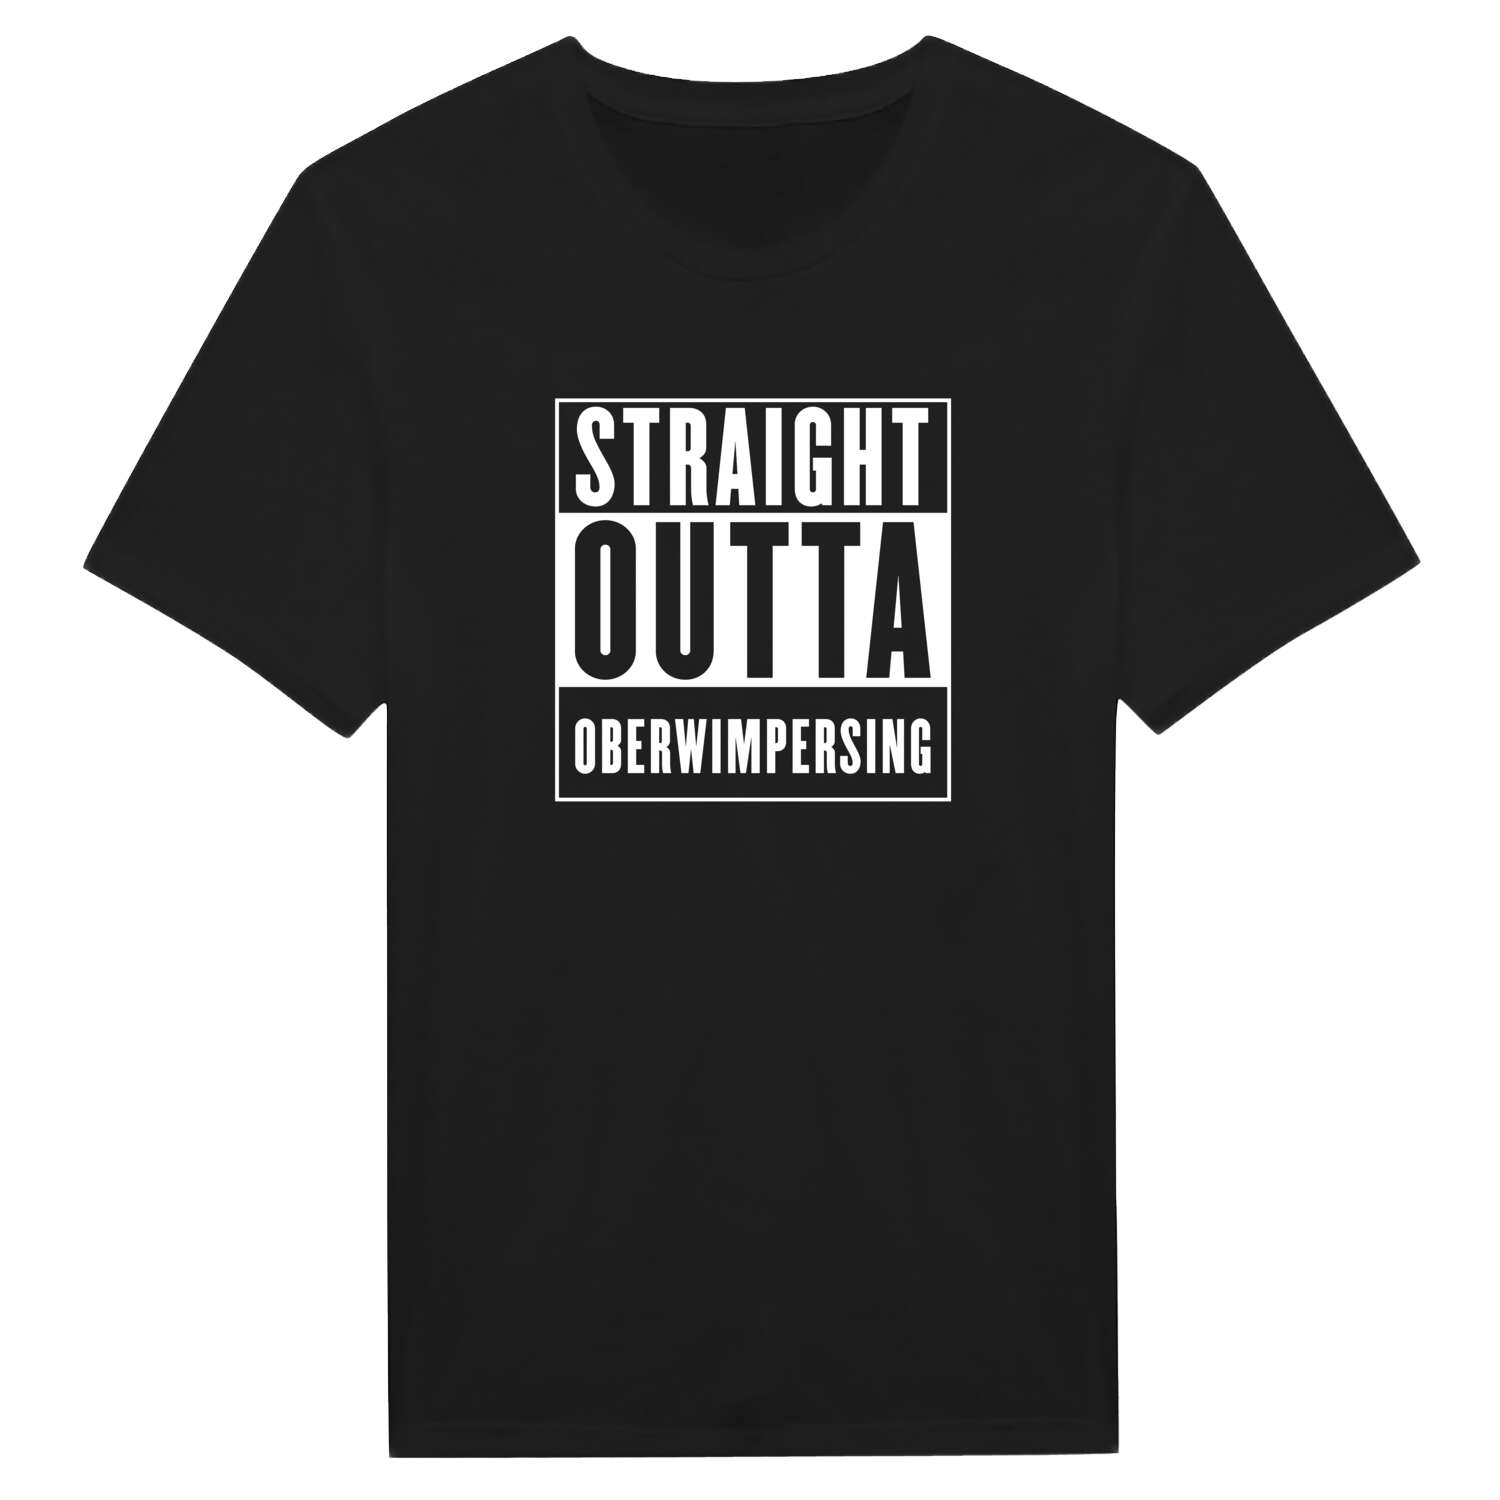 Oberwimpersing T-Shirt »Straight Outta«